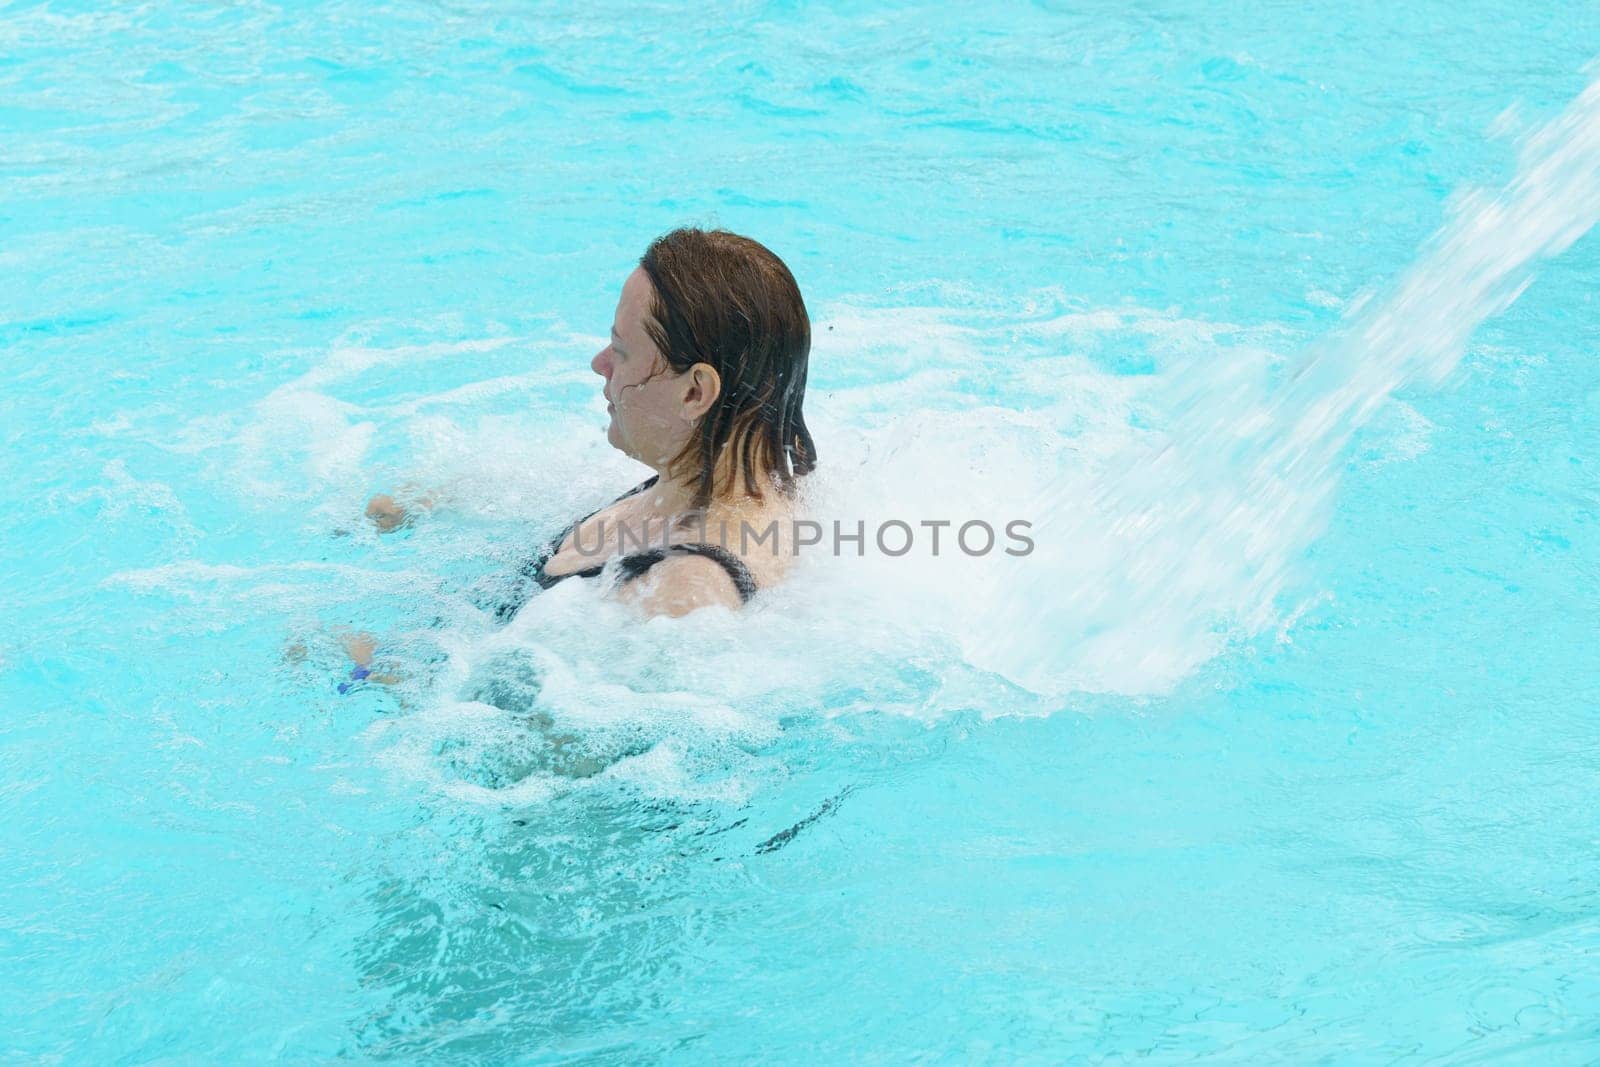 A woman is joyfully swimming in a pool as a refreshing spray of water cascades down, creating a fun and relaxing atmosphere.